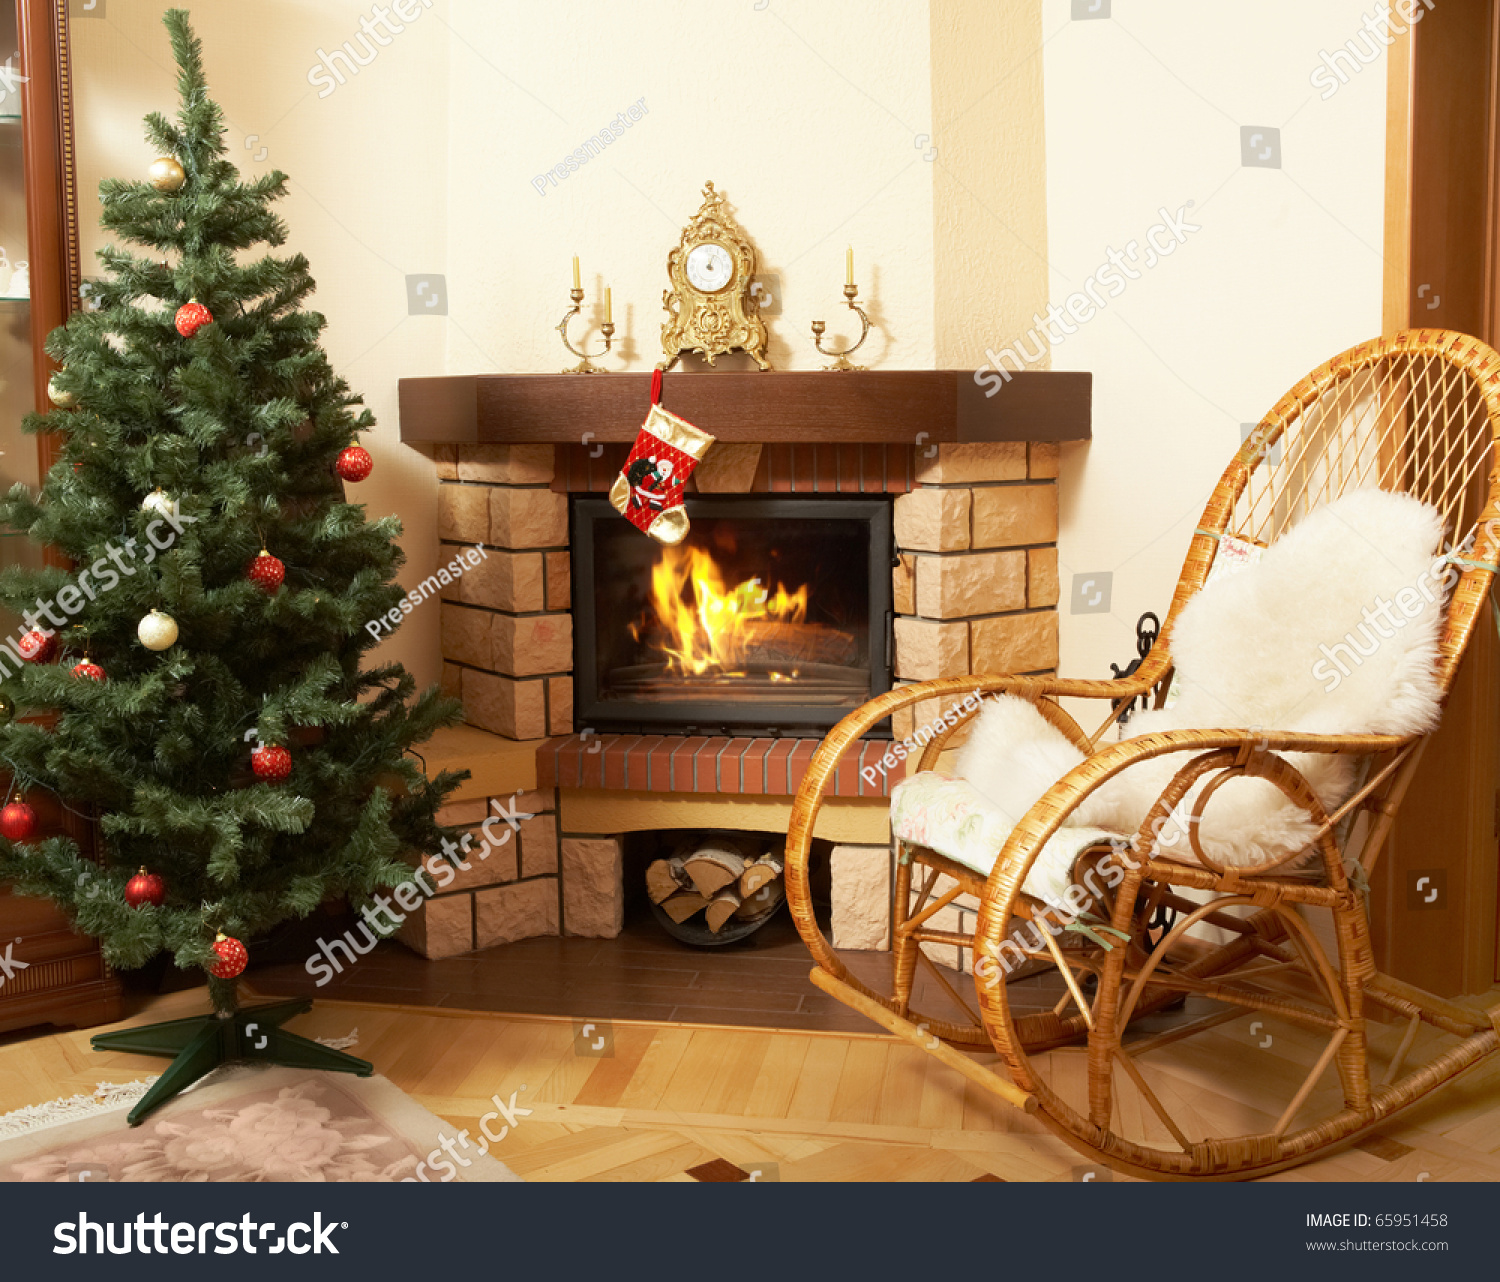 Image Of House Room With Rocking-Chair, Christmas Tree, Fireplace In It ...